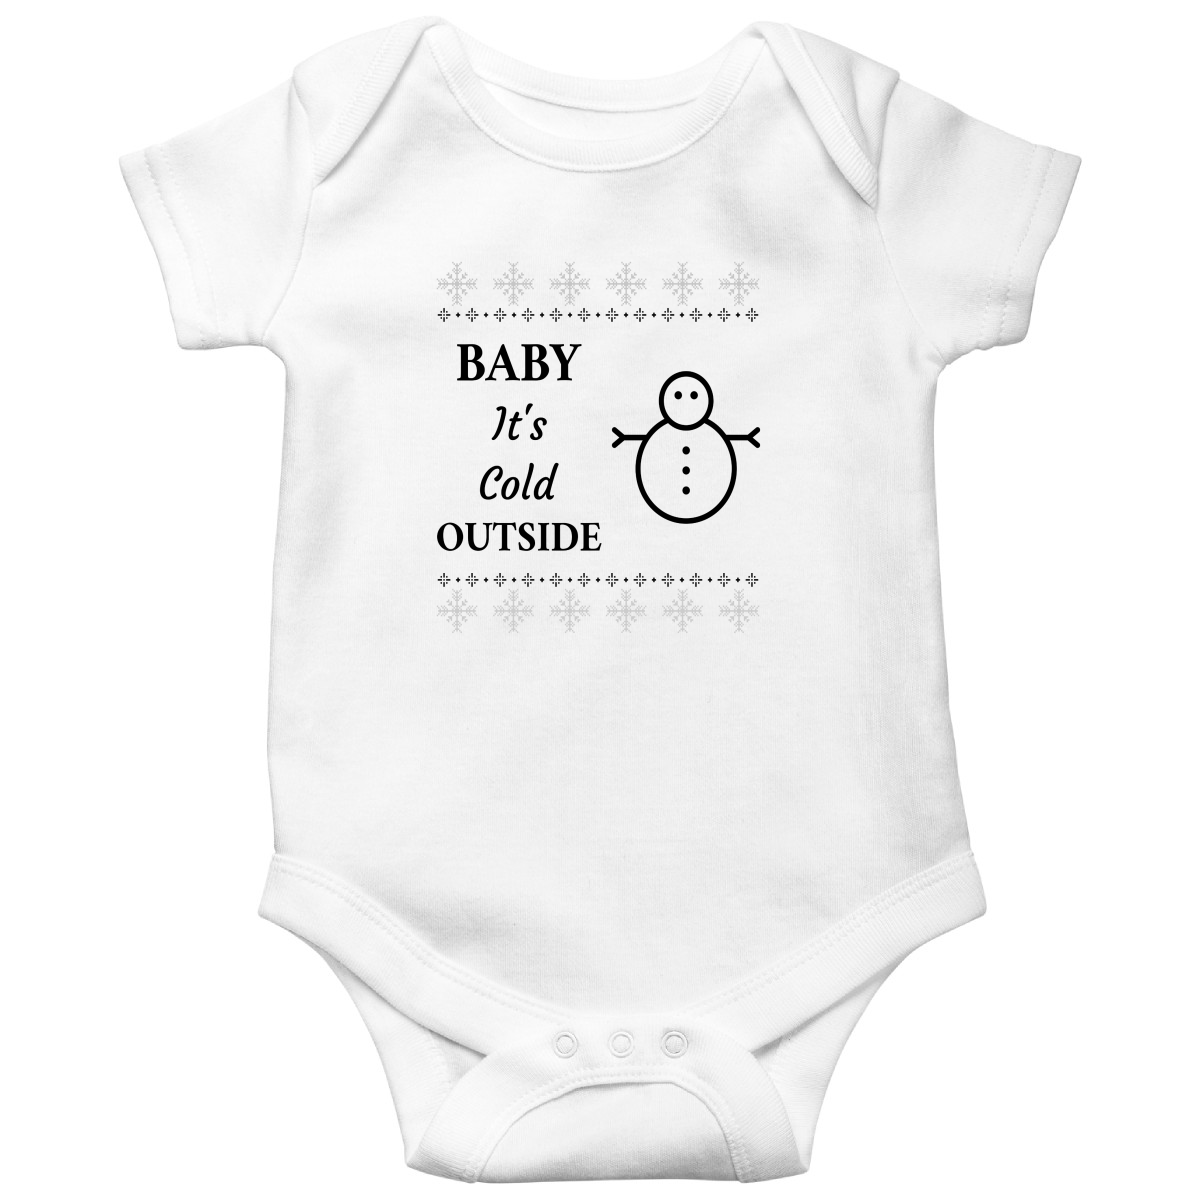 Baby It's Cold Outside Baby Bodysuits